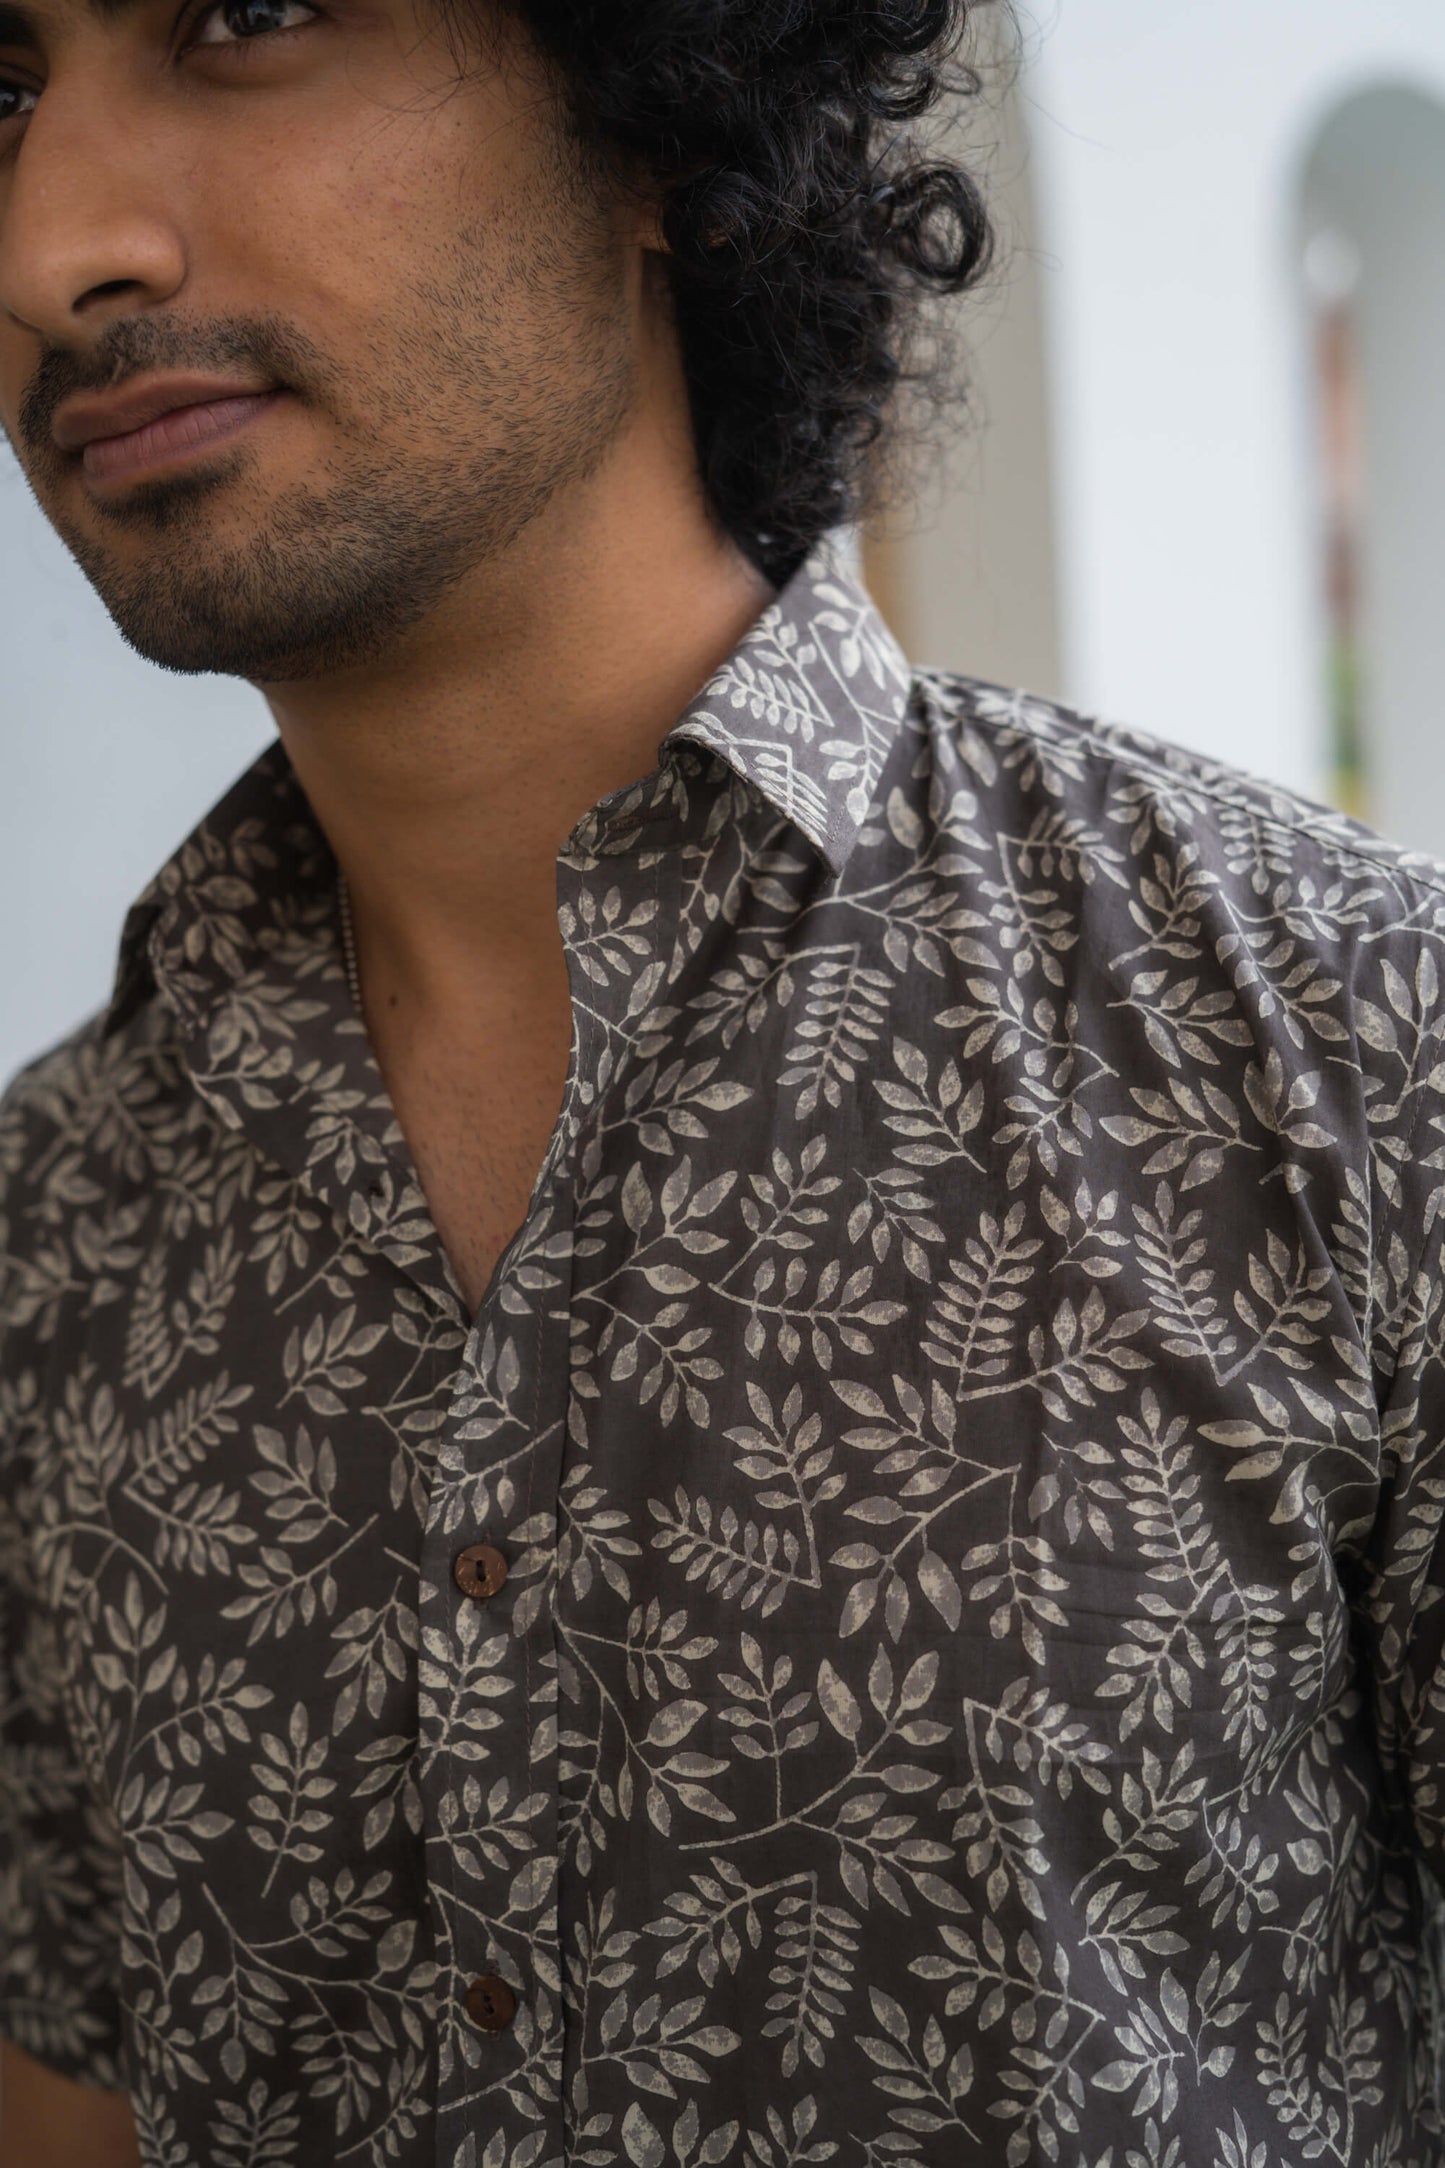 The Dark Grey All-Over Floral Print Shirt (Half Sleeves)